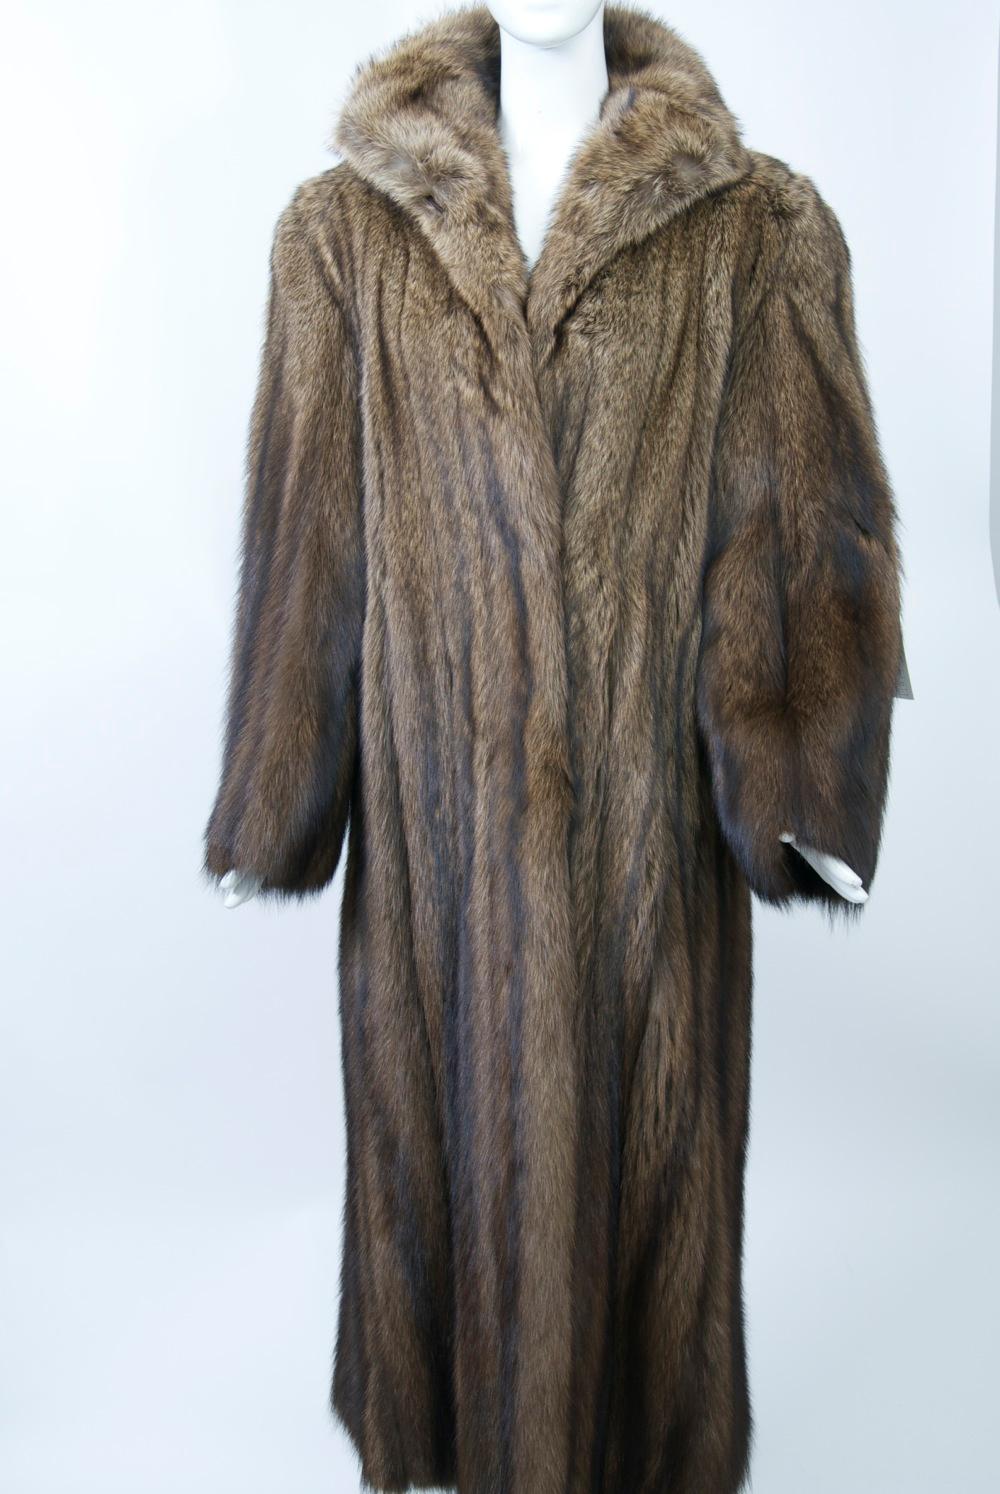 Fisher is considered one of the most luxurious furs. This full coat features a small spread collar that can be buttoned up at the neck, a straight cut, and strong shoulders. In addition to the button at the neck, there are fur hook closures down the